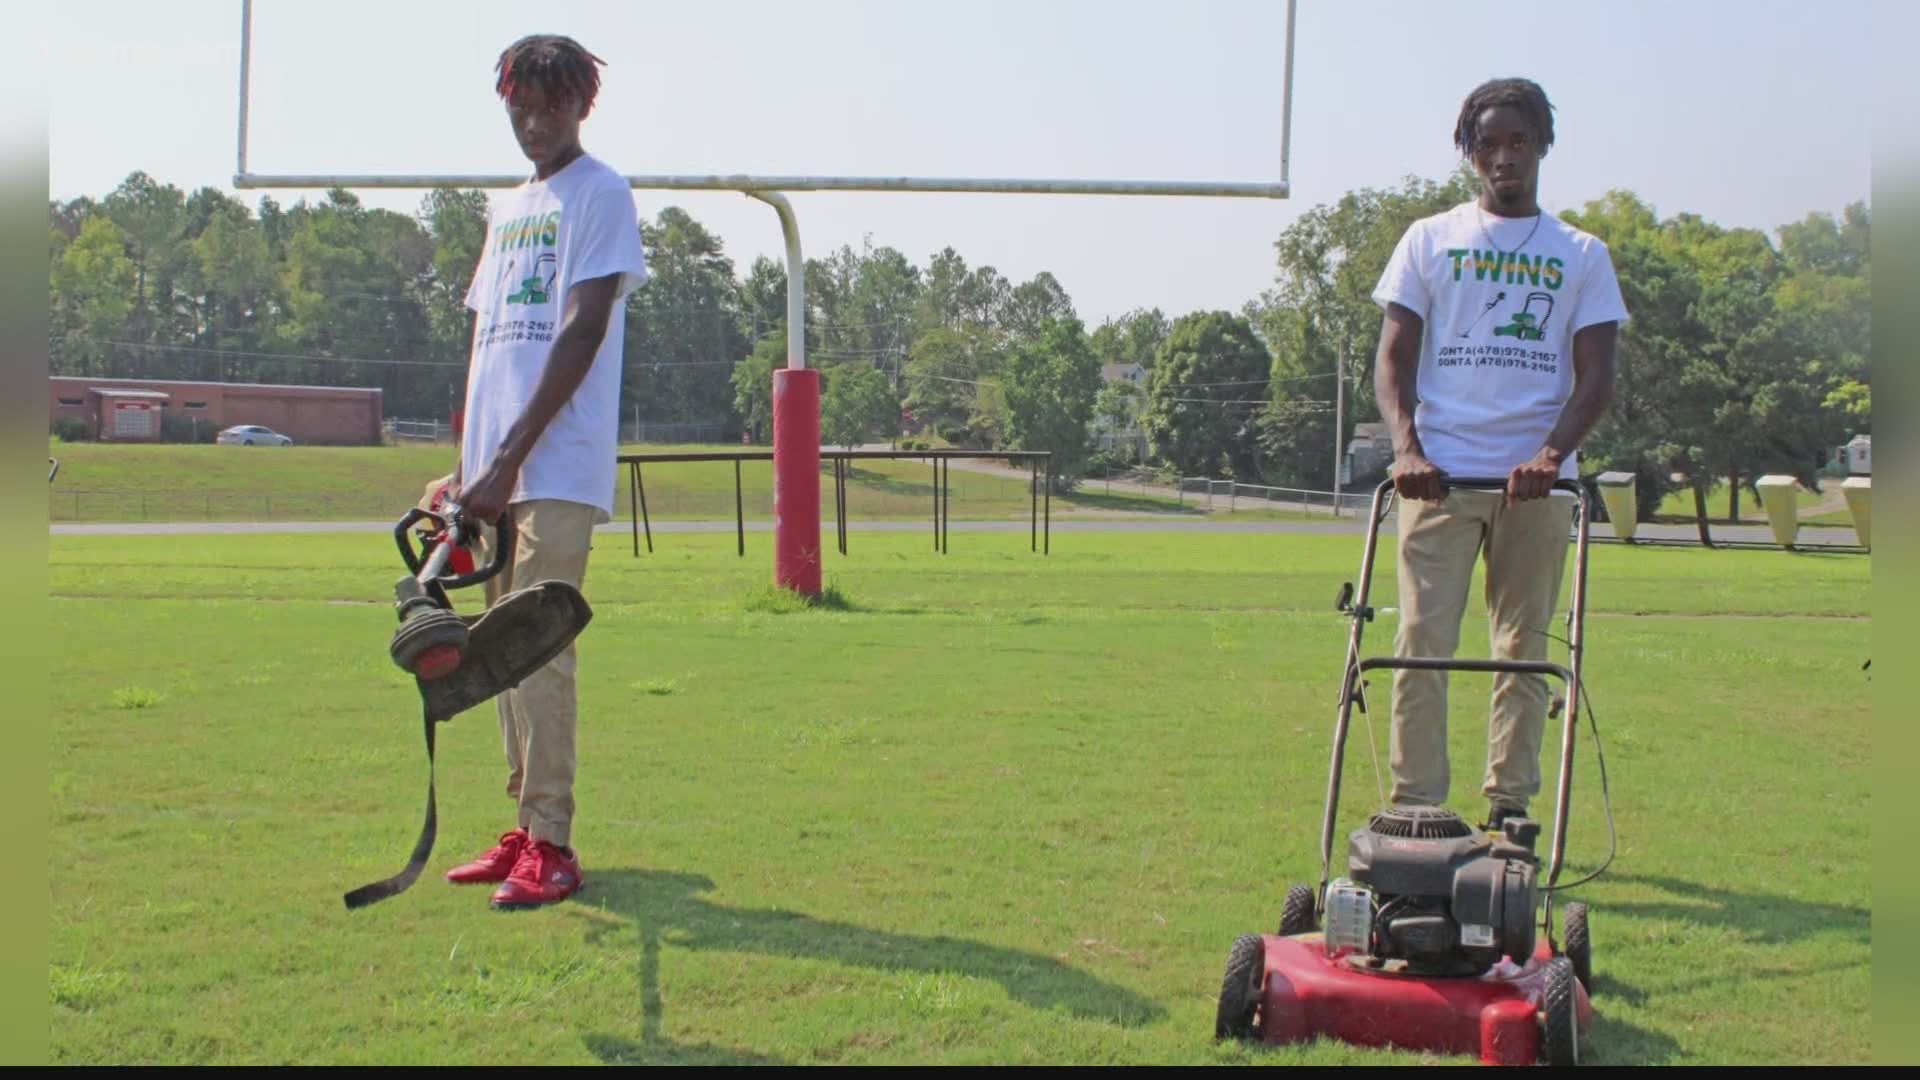 After COVID-19 canceled their summer plans, Donta and Jonta Thorpe decided to start a business of their own called Twins Lawn Service.